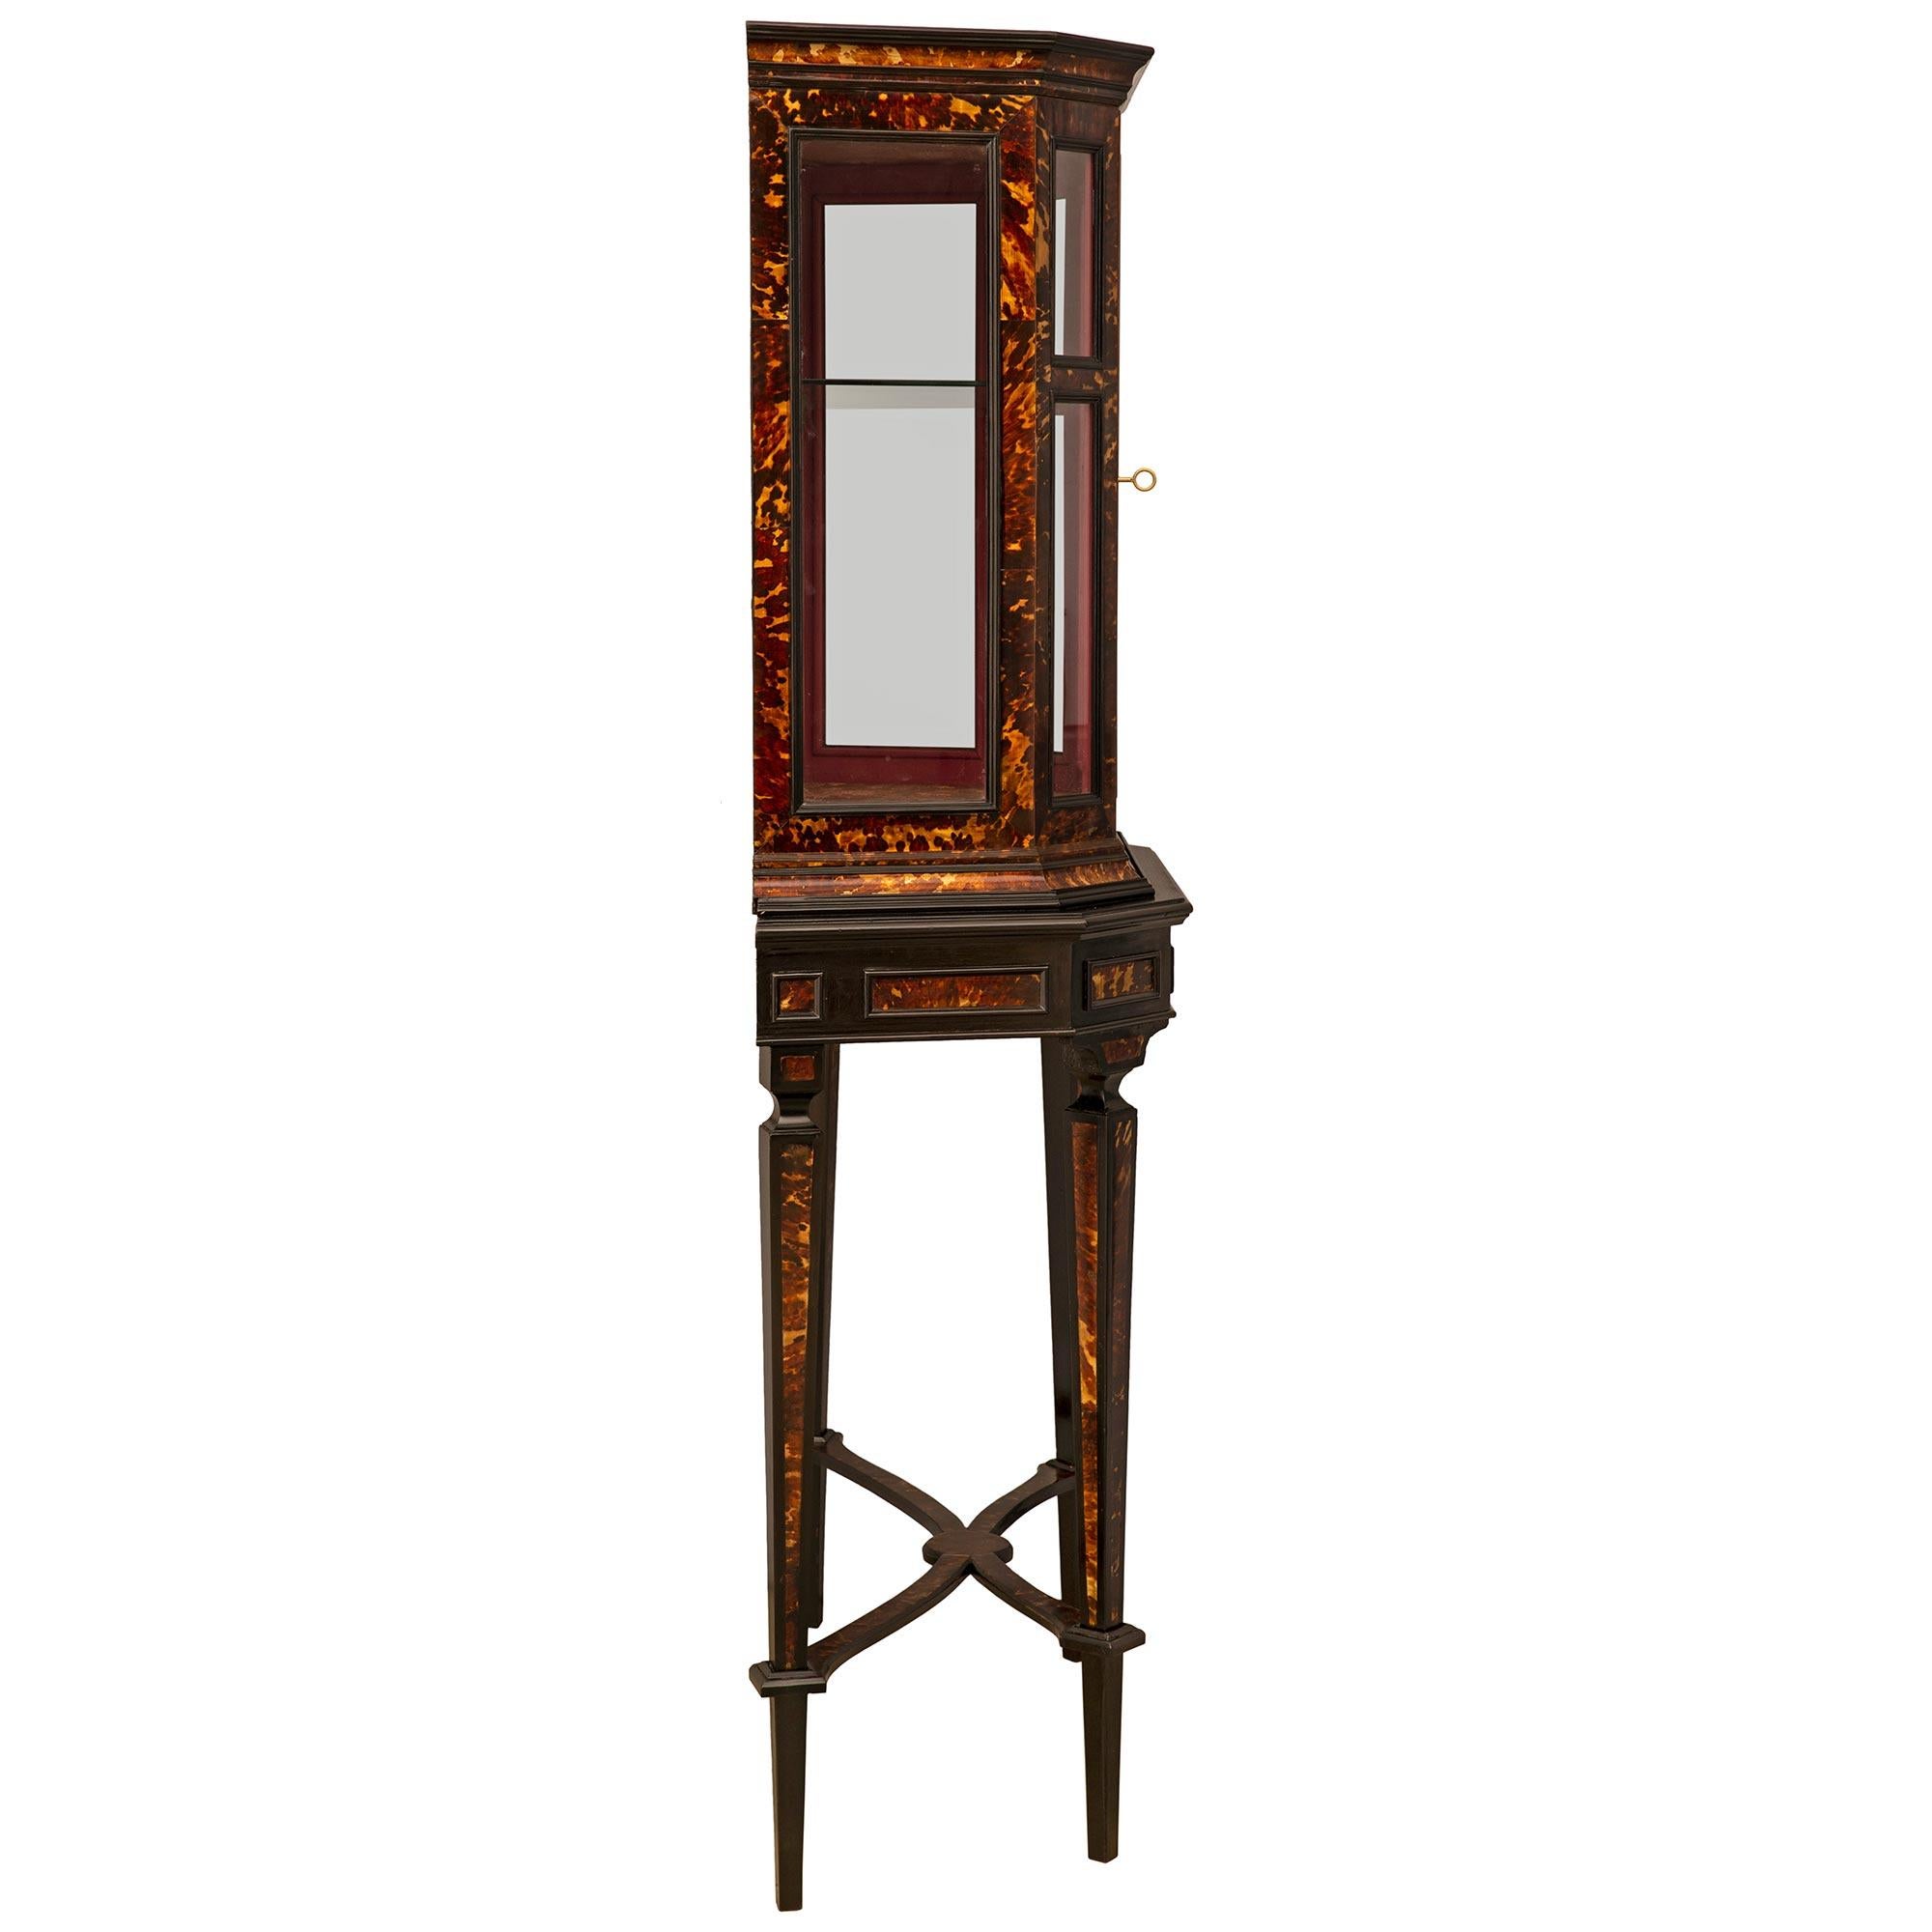 Continental 19th Century Ebonized Fruitwood And Tortoiseshell Cabinet Vitrine In Good Condition For Sale In West Palm Beach, FL